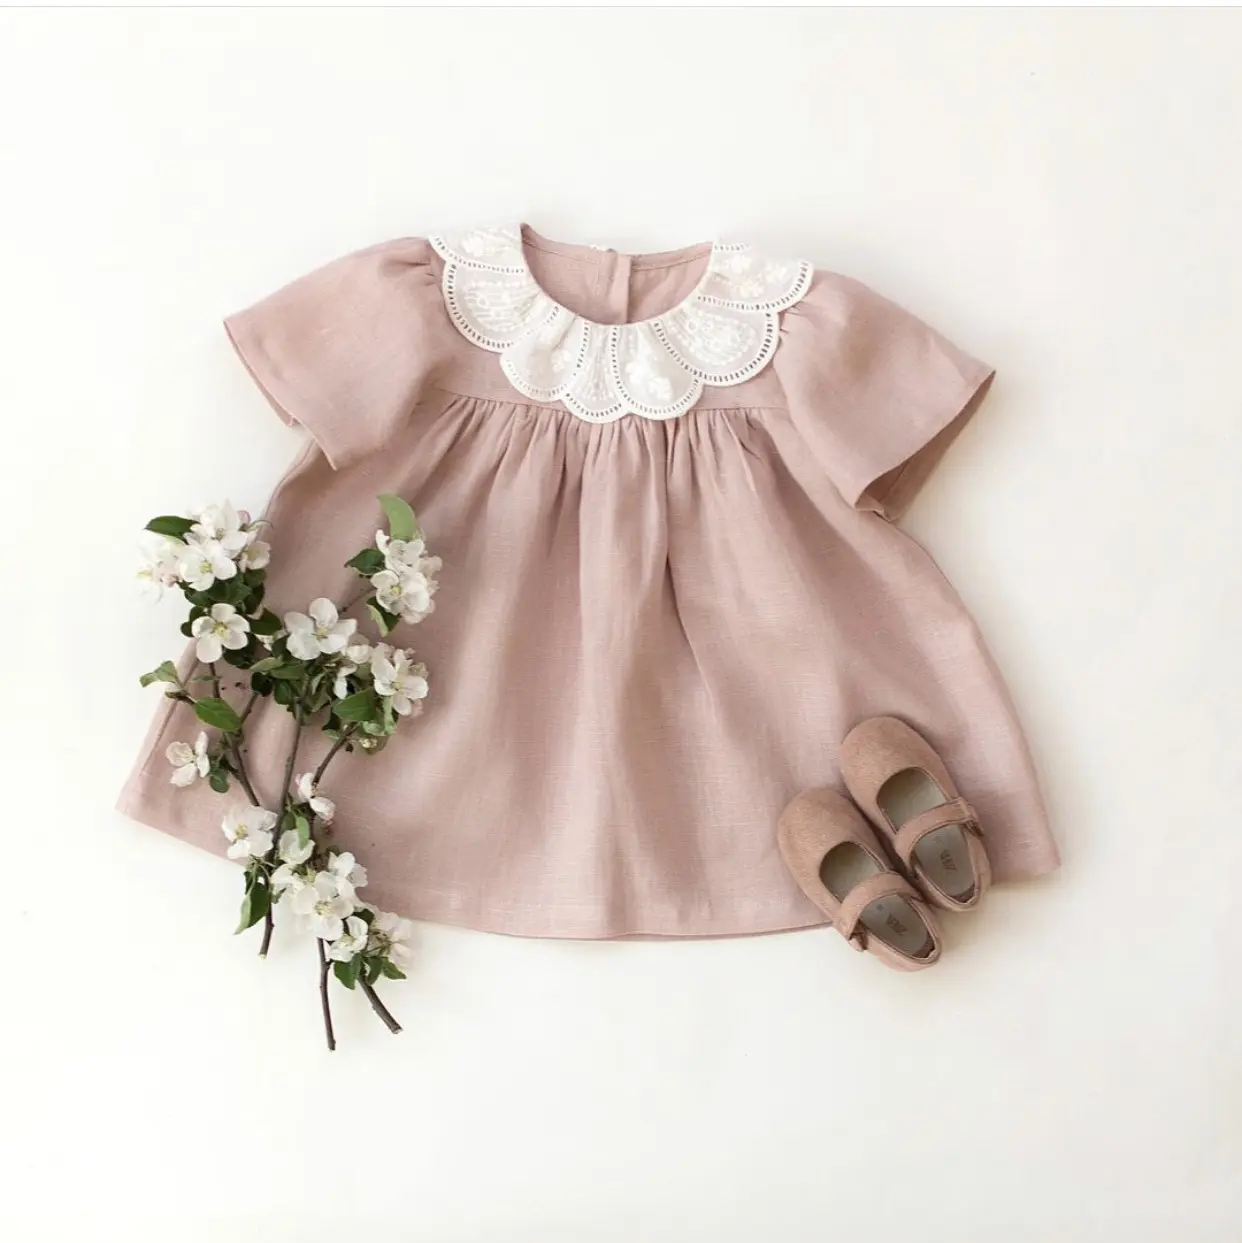 Hot Sale Toddler Girls Floral Embroidery Peter Pan Collar Baby Doll Dress Children's Baby Cotton Short Sleeve Dress Pink